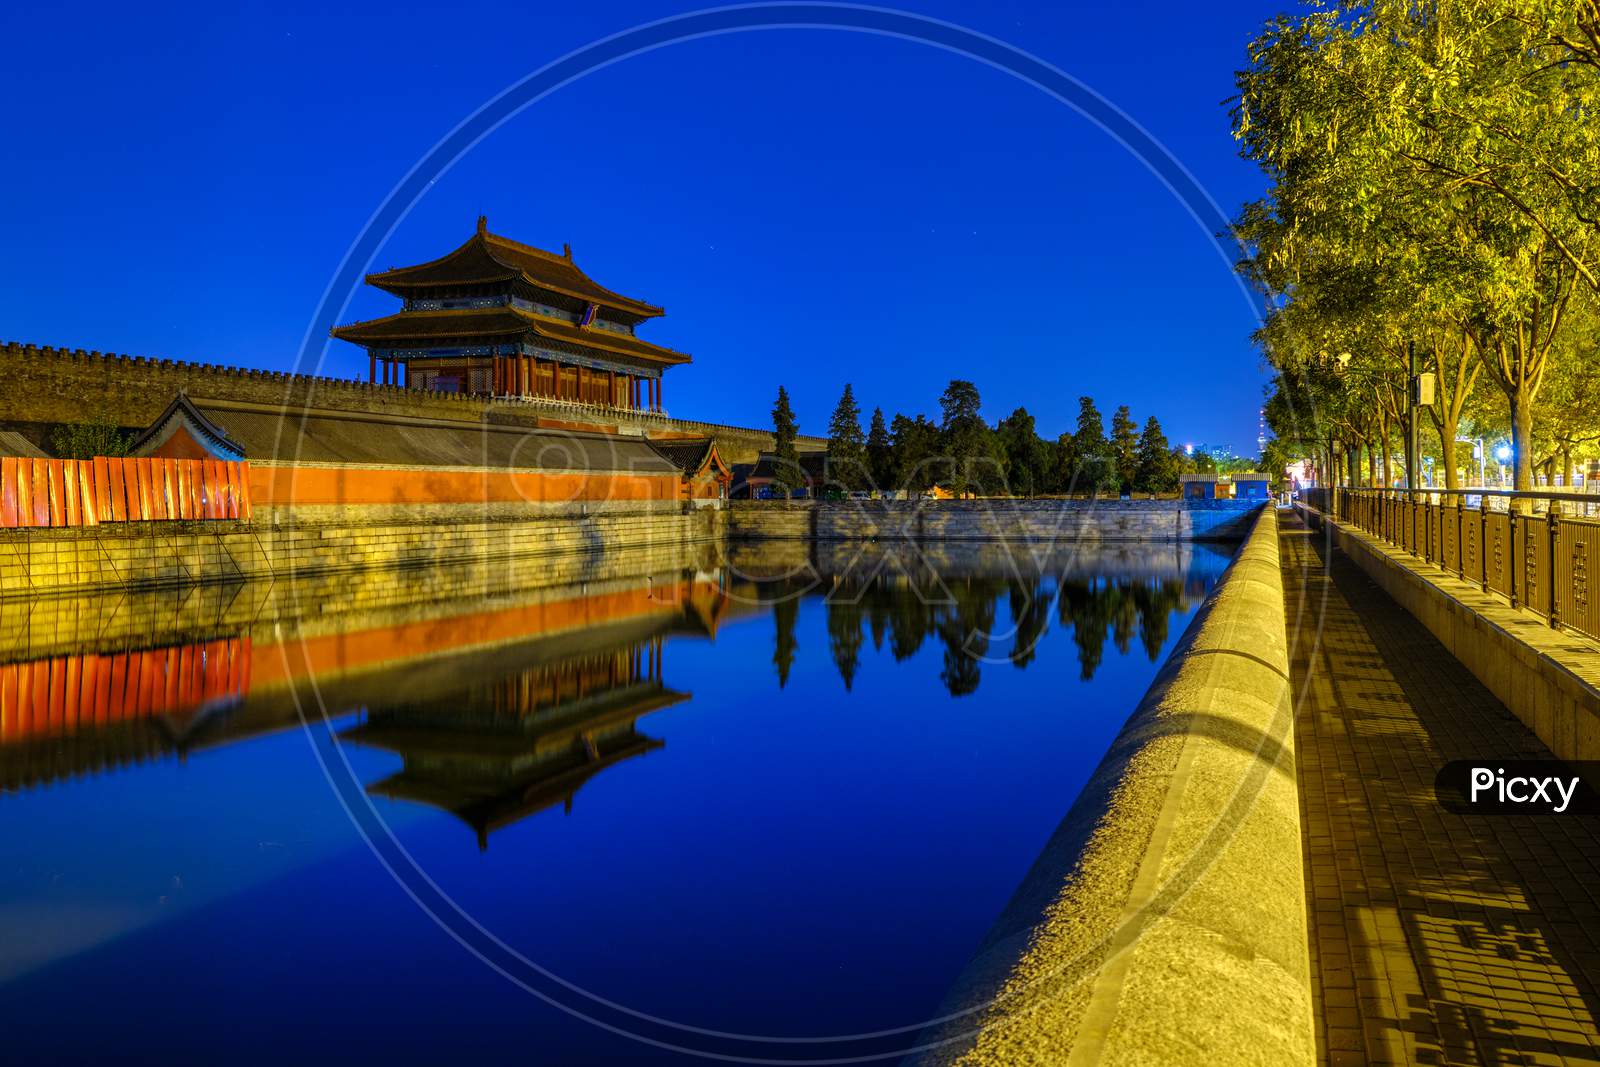 The Gate Of Divine Might, North Exit Gate Of The Forbidden City Palace Museum, Reflecting In The Water Moat In Beijing, China